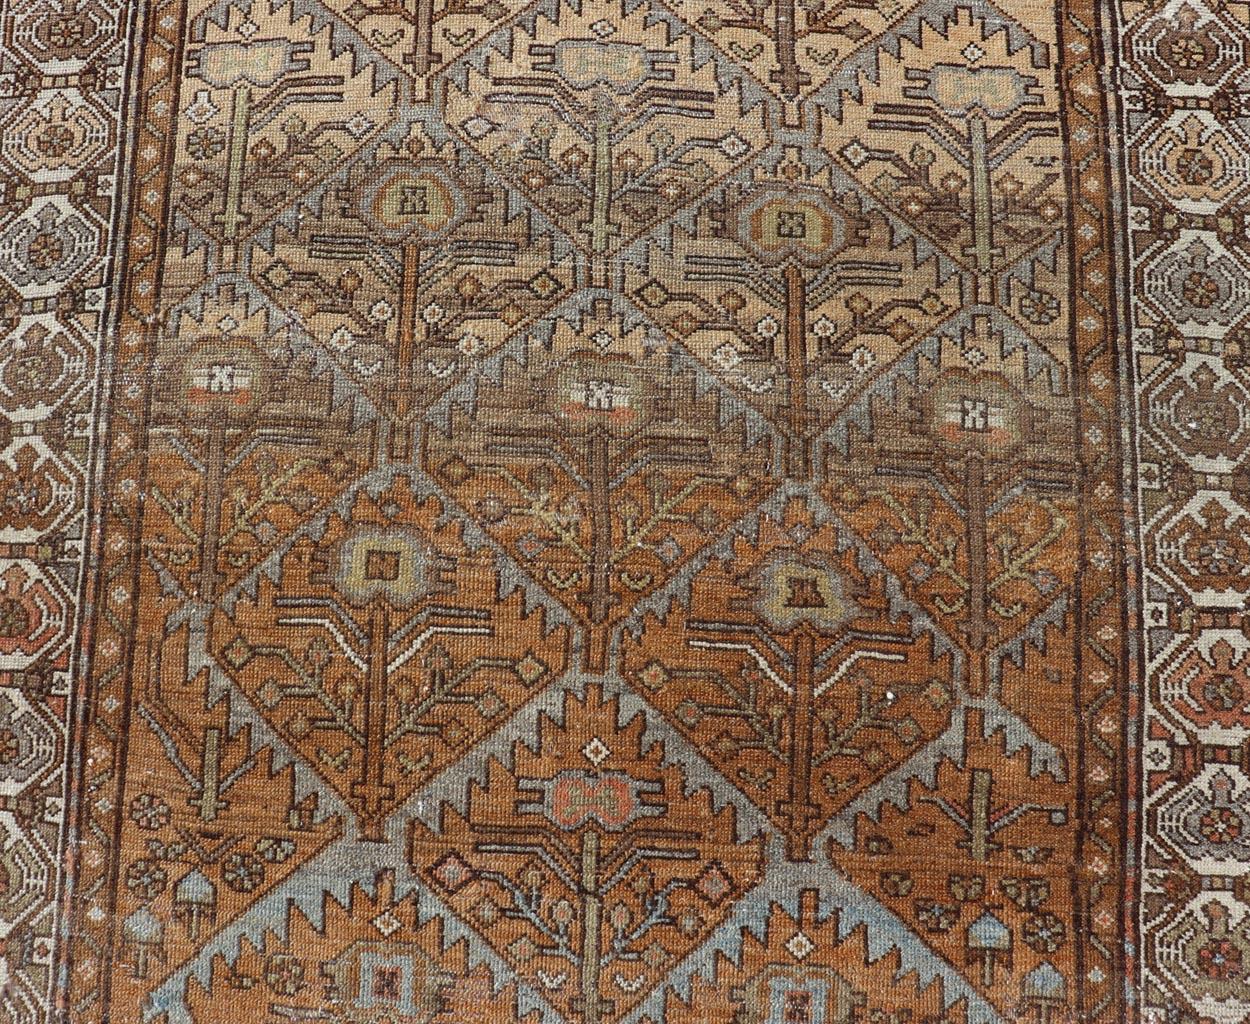 Wool Antique Persian Malayer in Rustic Earthy Tones With All-Over Tribal Medallions